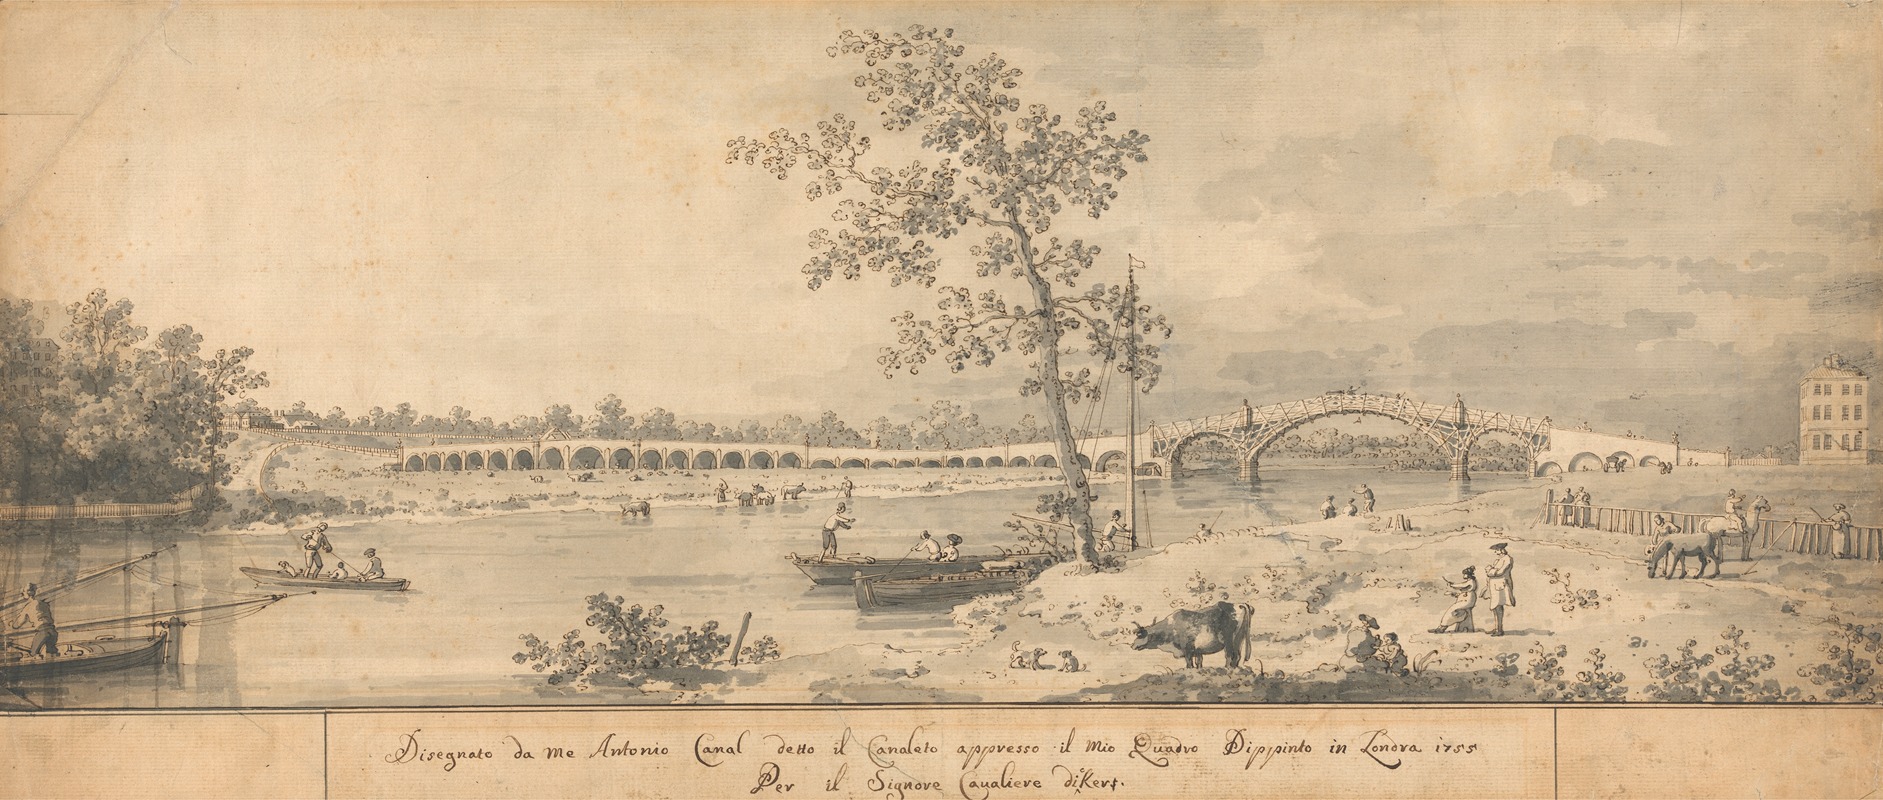 Canaletto - Old Walton Bridge seen from the Middlesex Shore